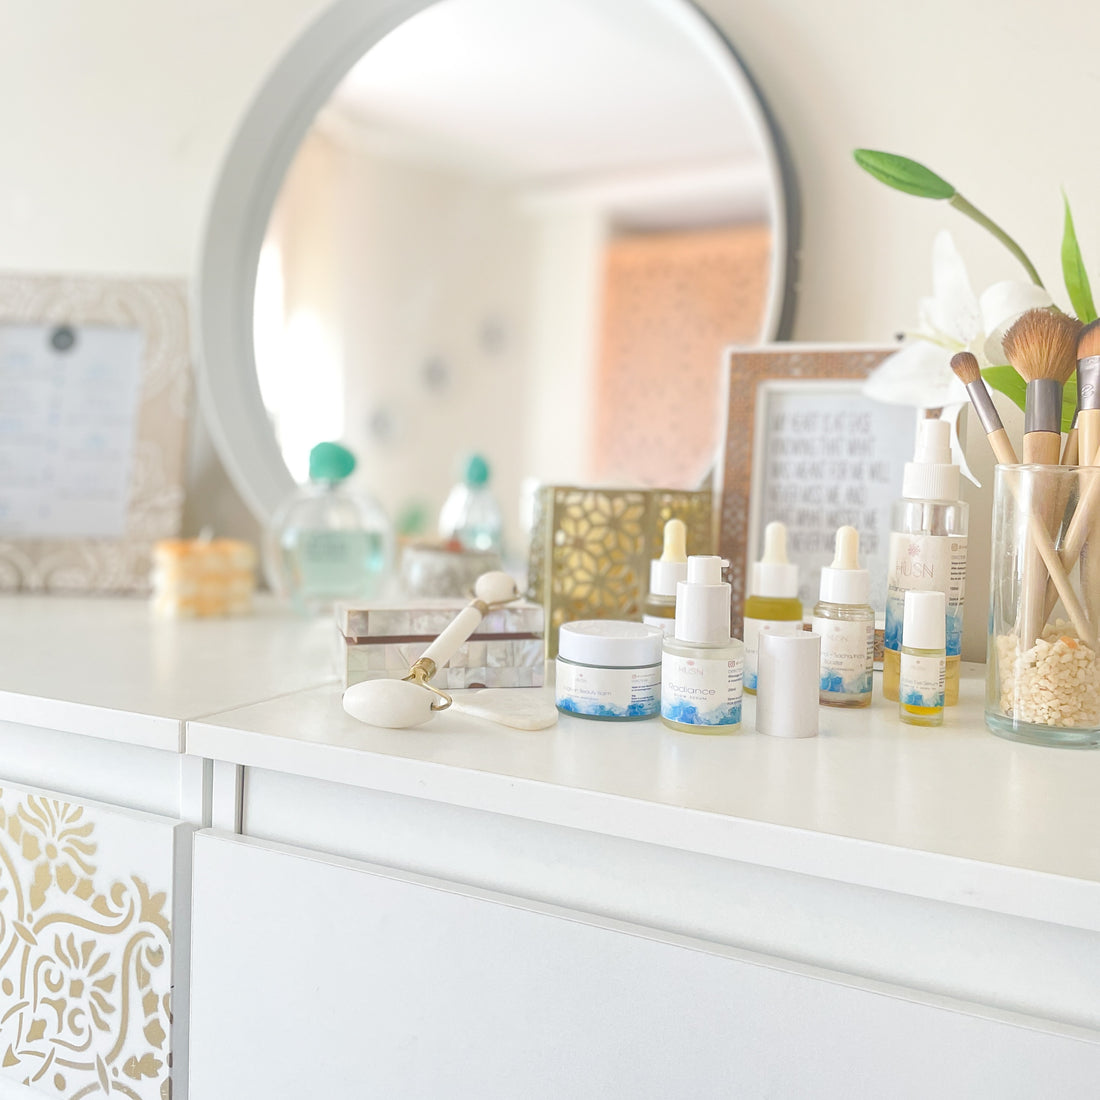 Why is a morning skincare routine important?